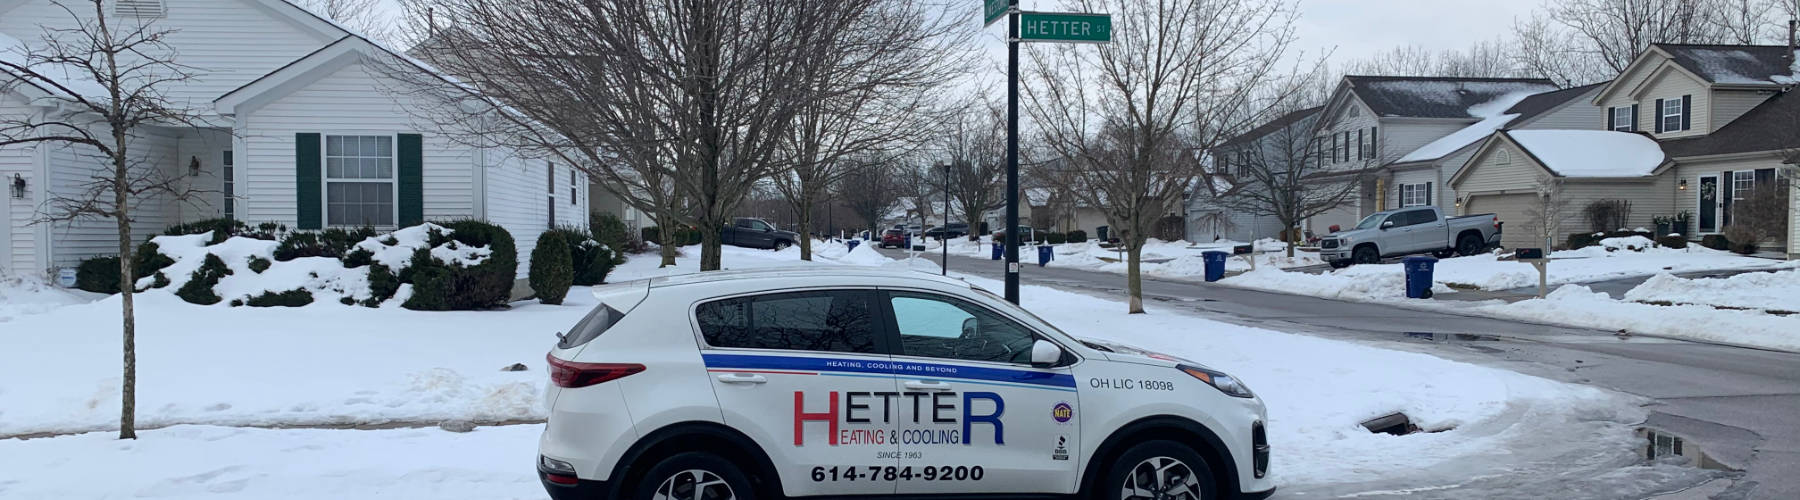 Picture of Hetter Heating vehicle on street in winter